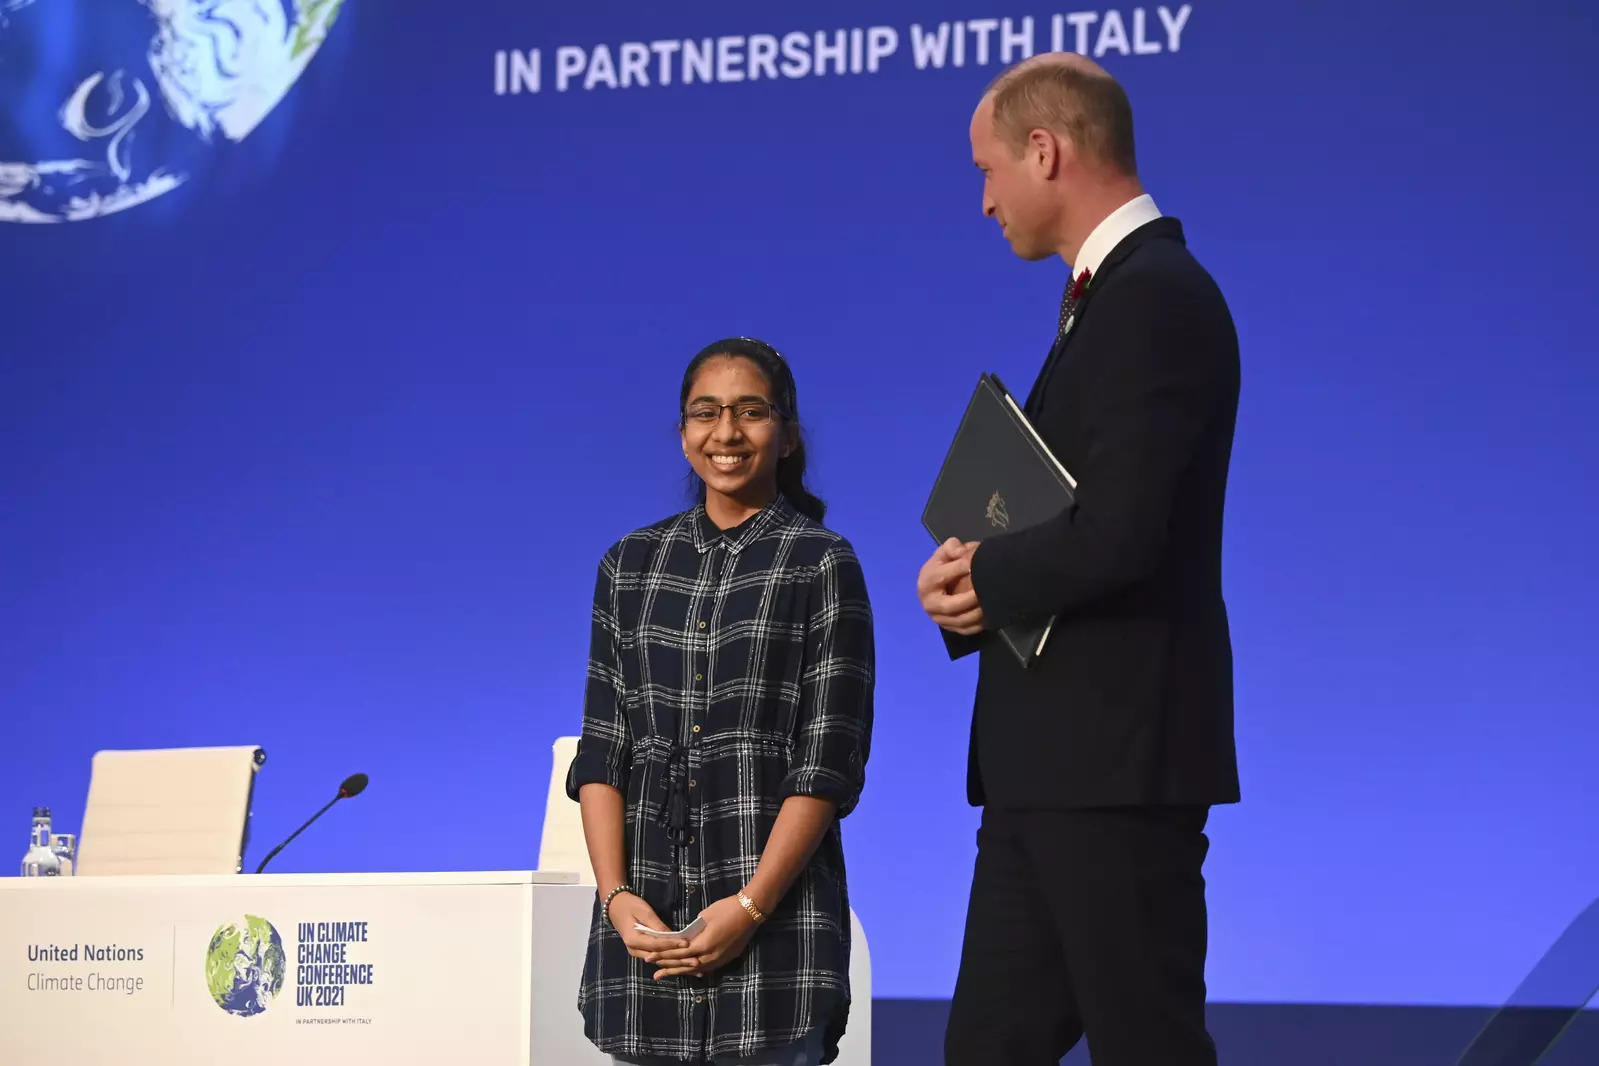 Britain's Prince William stands by Earthshot Prize finalist Vinisha Umashankar during the World Leaders' Summit &quot;Accelerating Clean Technology Innovation and Deployment&quot;, at the COP26 Summit, in Glasgow, Scotland, Tuesday, Nov. 2, 2021. The U.N. climate summit in Glasgow gathers leaders from around the world, in Scotland's biggest city, to lay out their vision for addressing the common challenge of global warming. (Jeff J Mitchell/Pool Photo via AP)